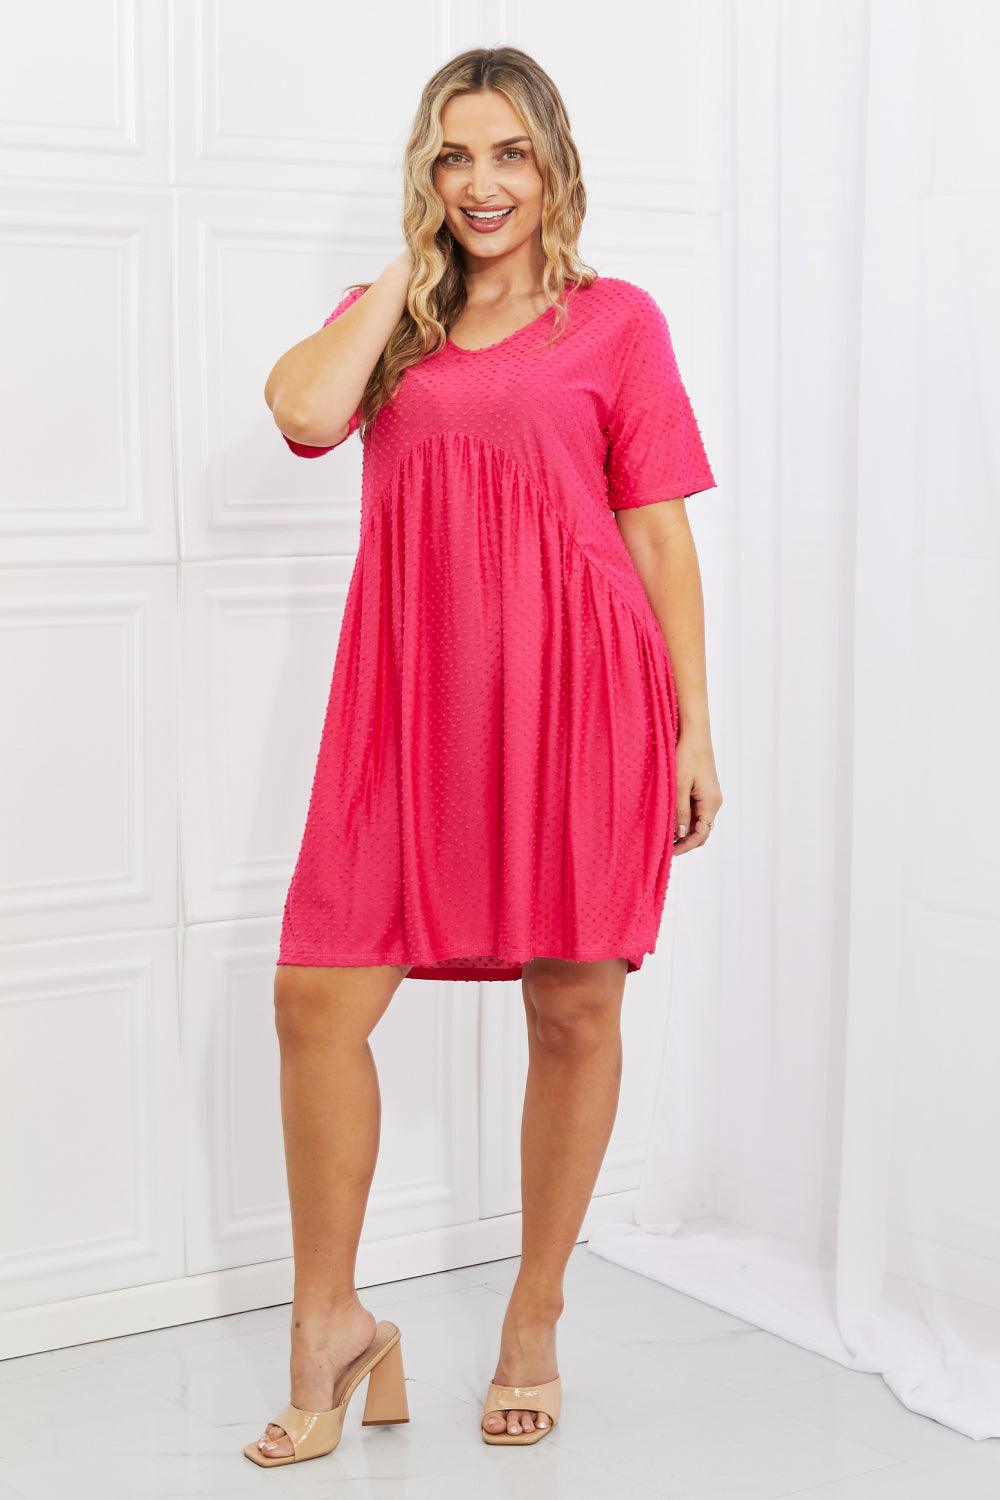 BOMBOM Another Day Swiss Dot Casual Dress in Fuchsia - Glamorous Boutique USA L.L.C.